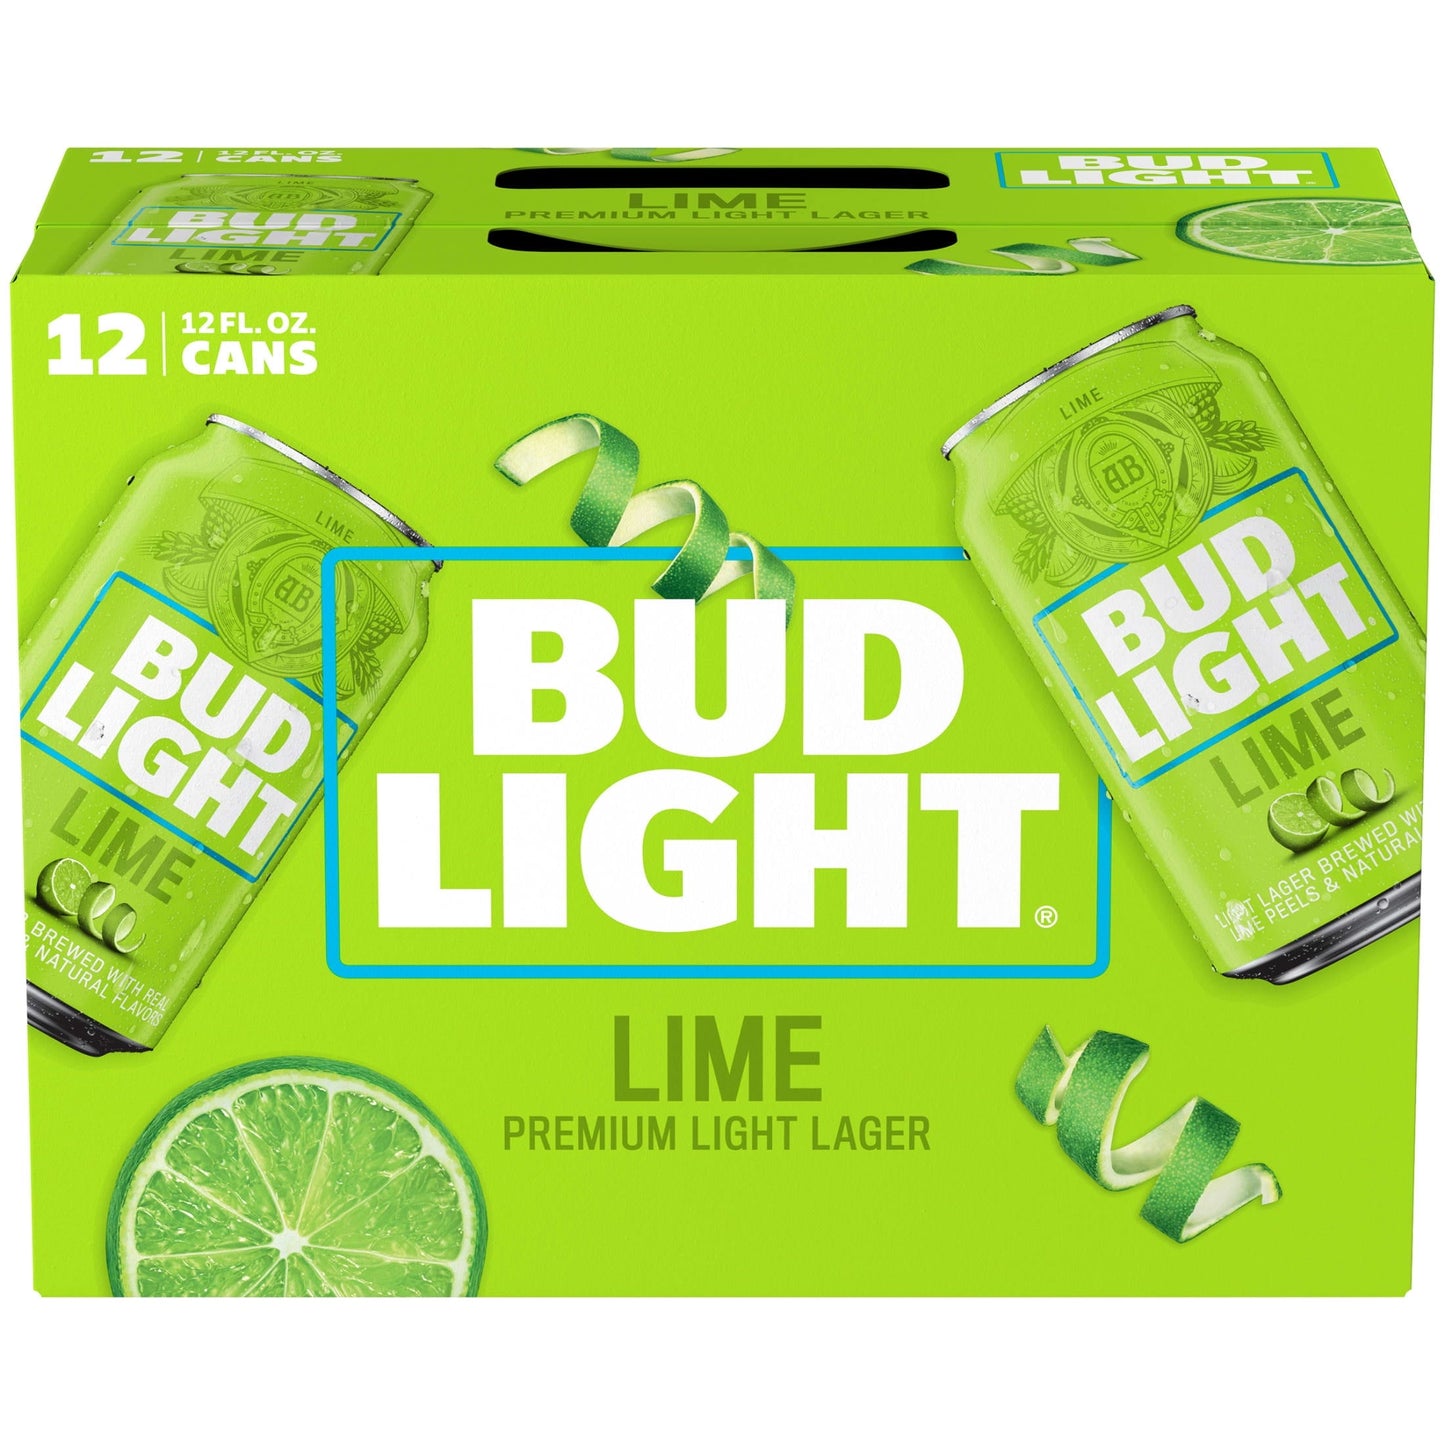 Bud Light Lime Beer, 12 Pack 12 fl. oz. Cans, 4.2% ABV, Domestic